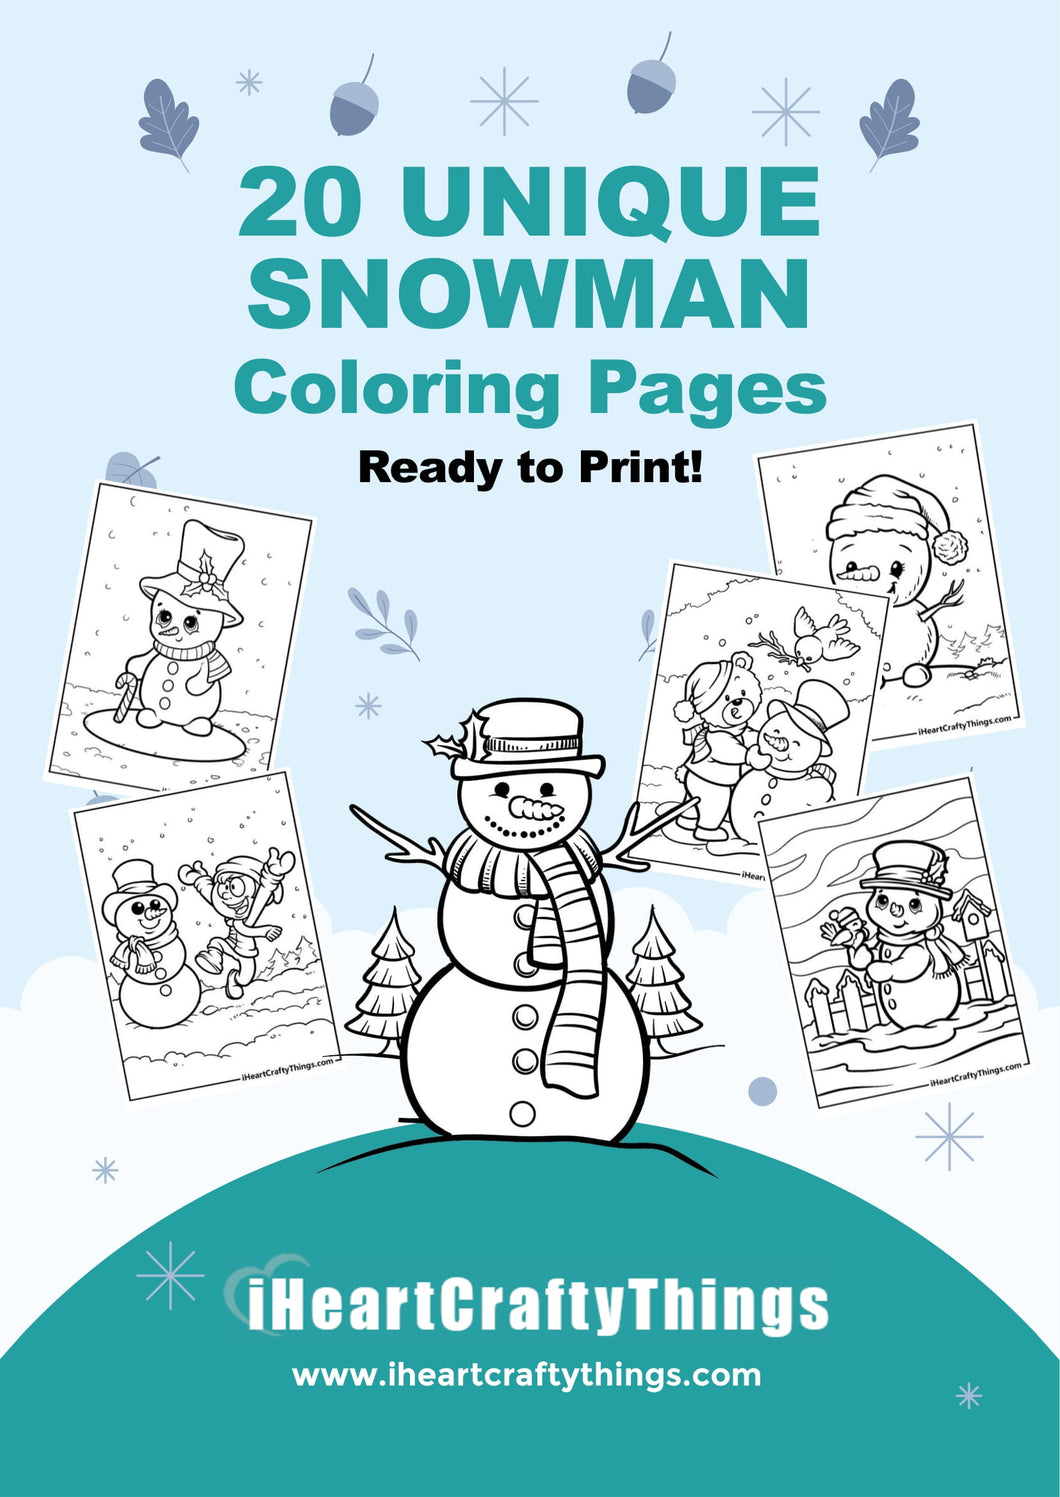 20 CUTE SNOWMAN COLORING PAGES